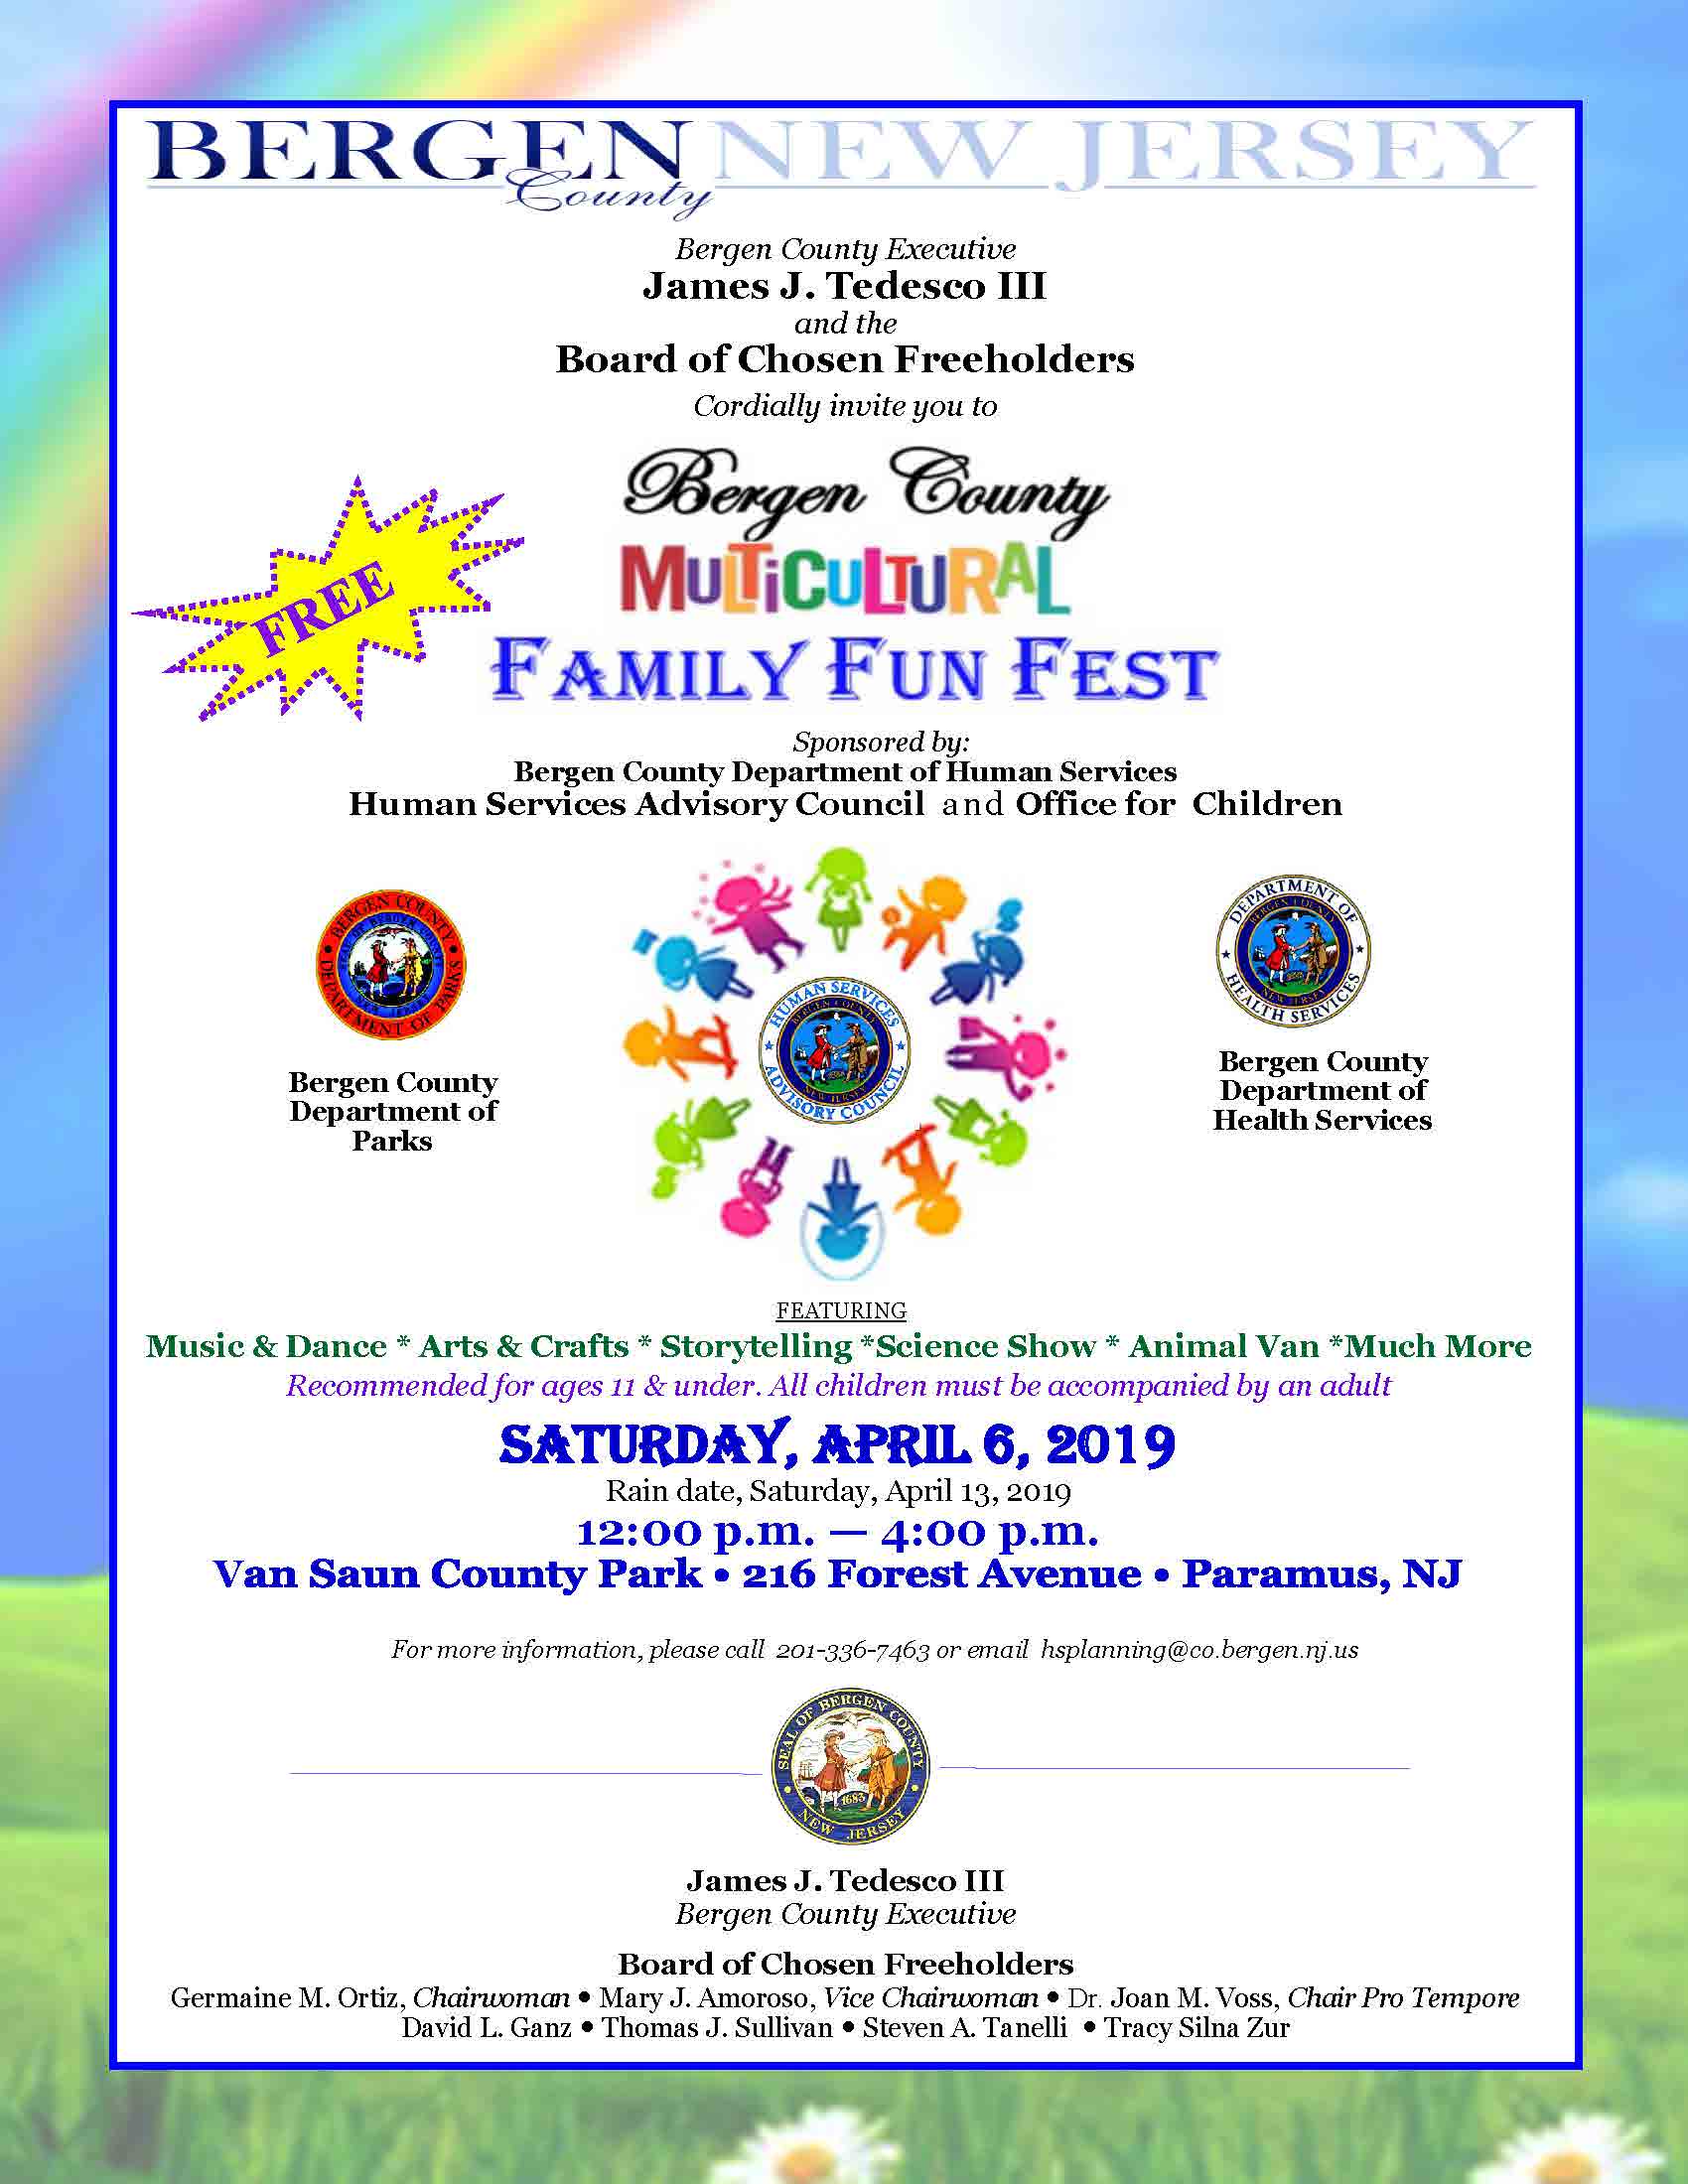 2019 Bergen County Multicultural Family Fun Fest Page 1